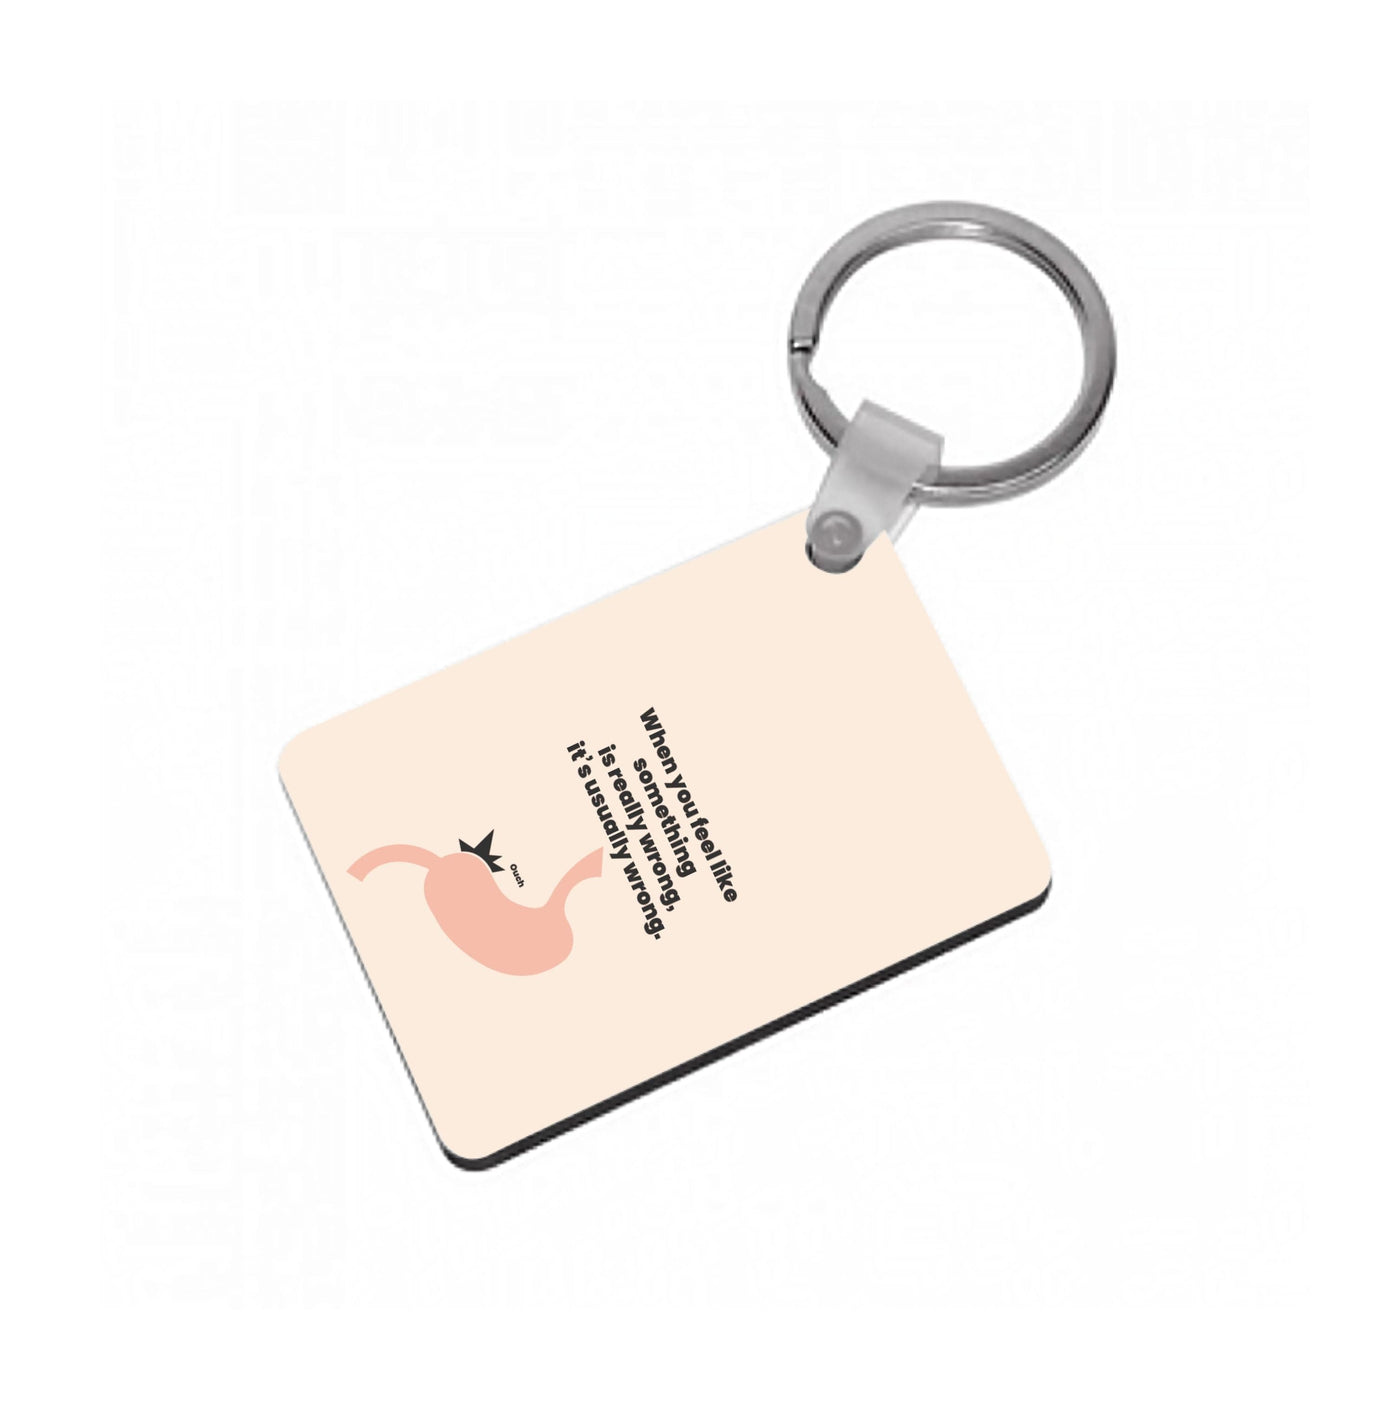 When you feel like something is really wrong - Kris Jenner Keyring